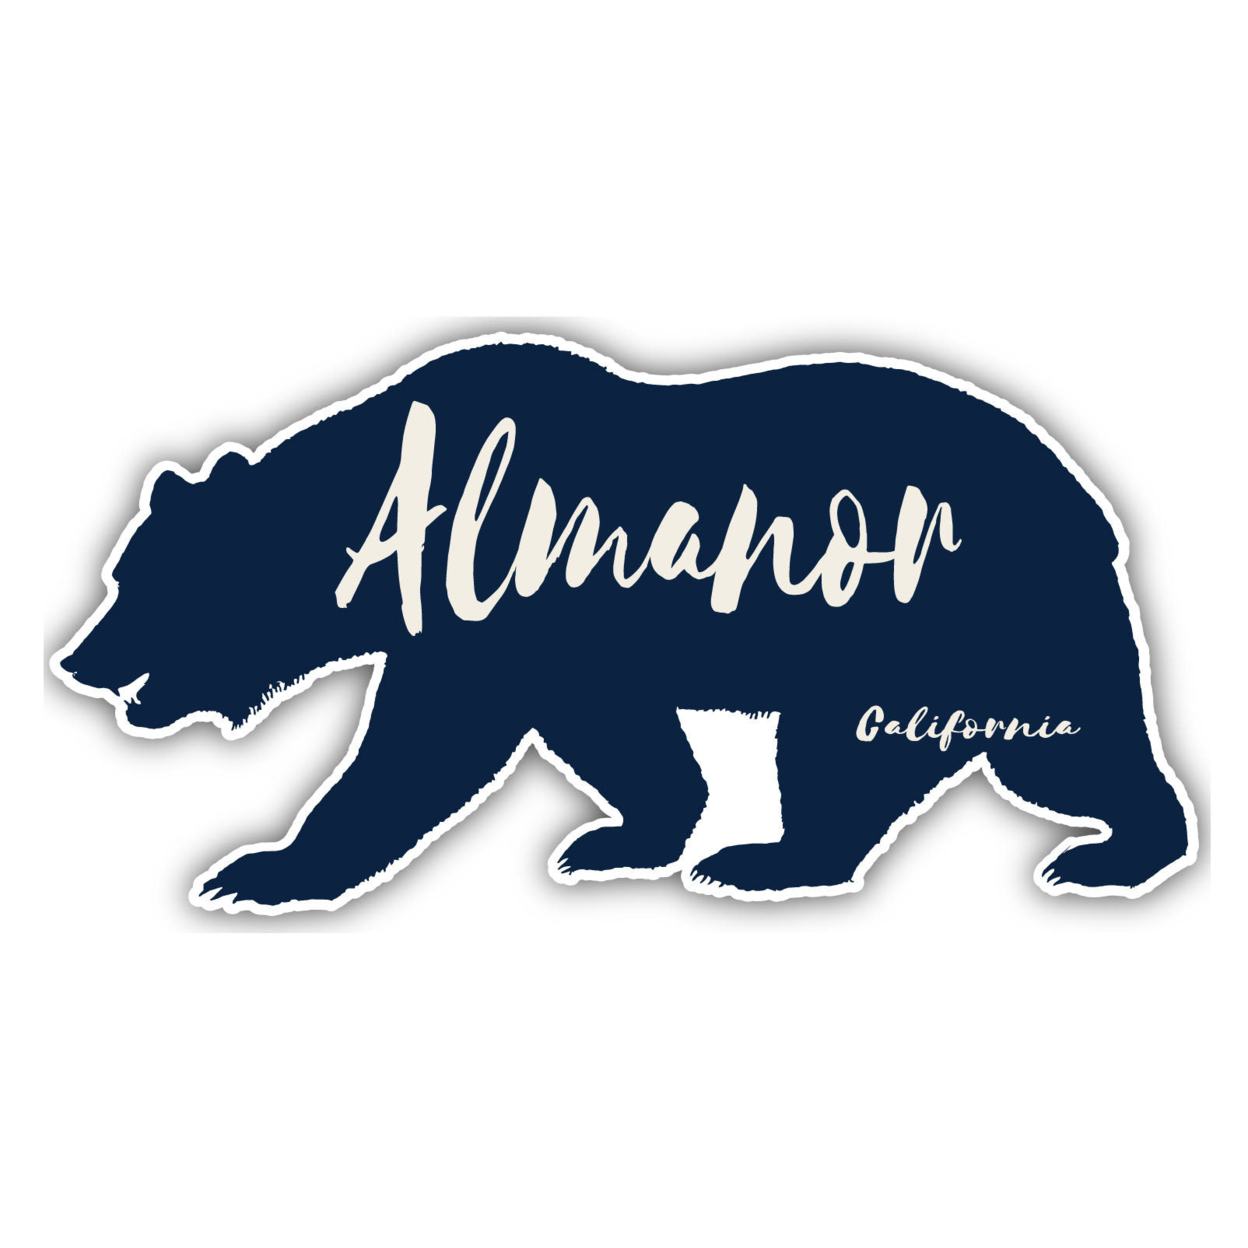 Almanor California Souvenir Decorative Stickers (Choose Theme And Size) - 4-Pack, 10-Inch, Camp Life